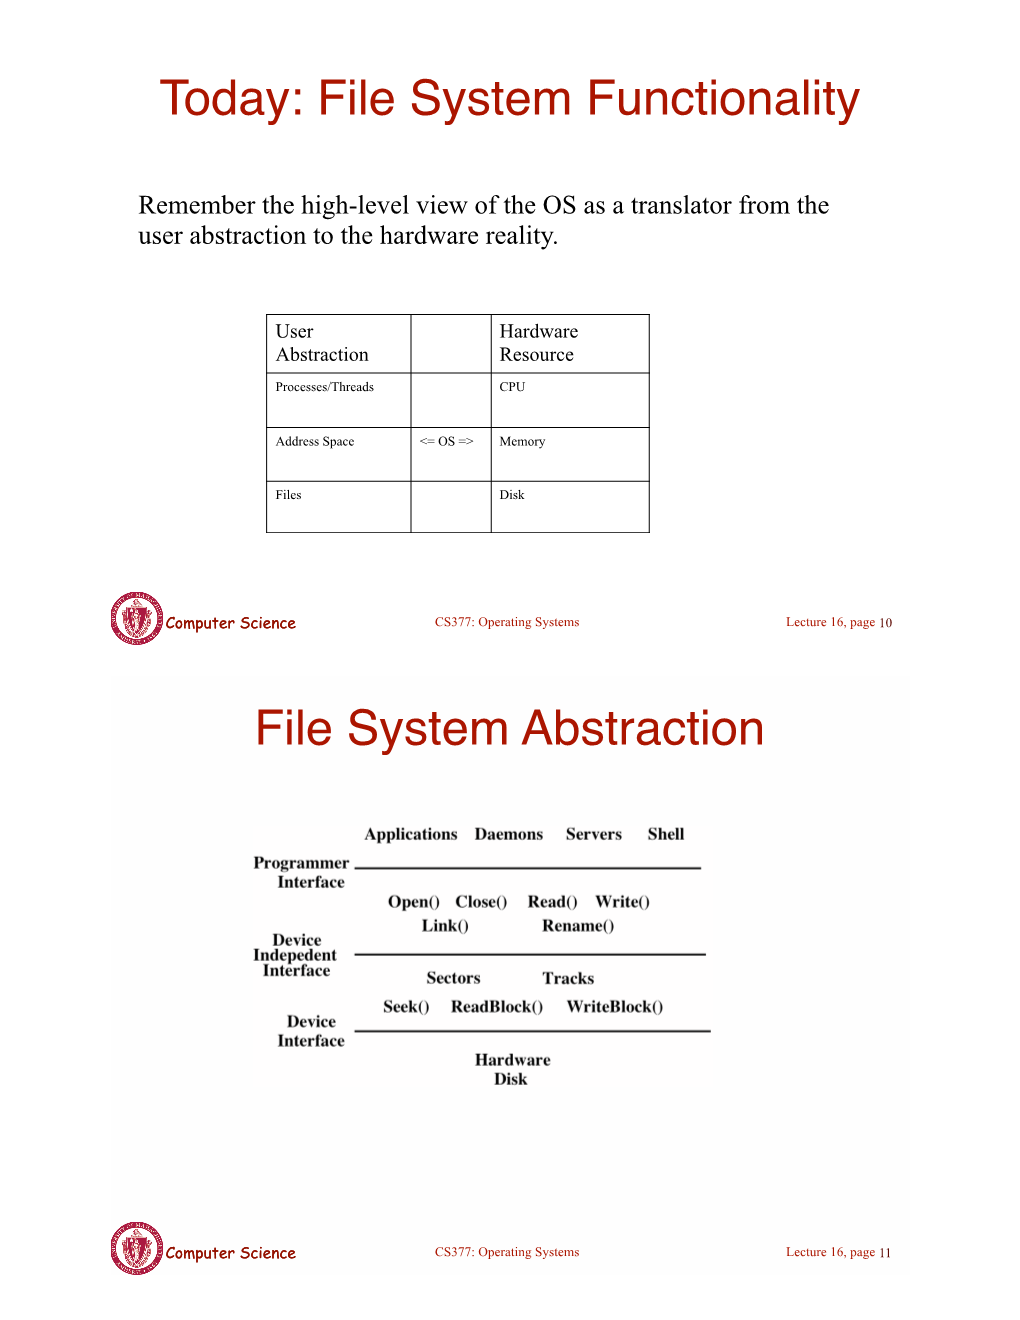 Today: File System Functionality File System Abstraction